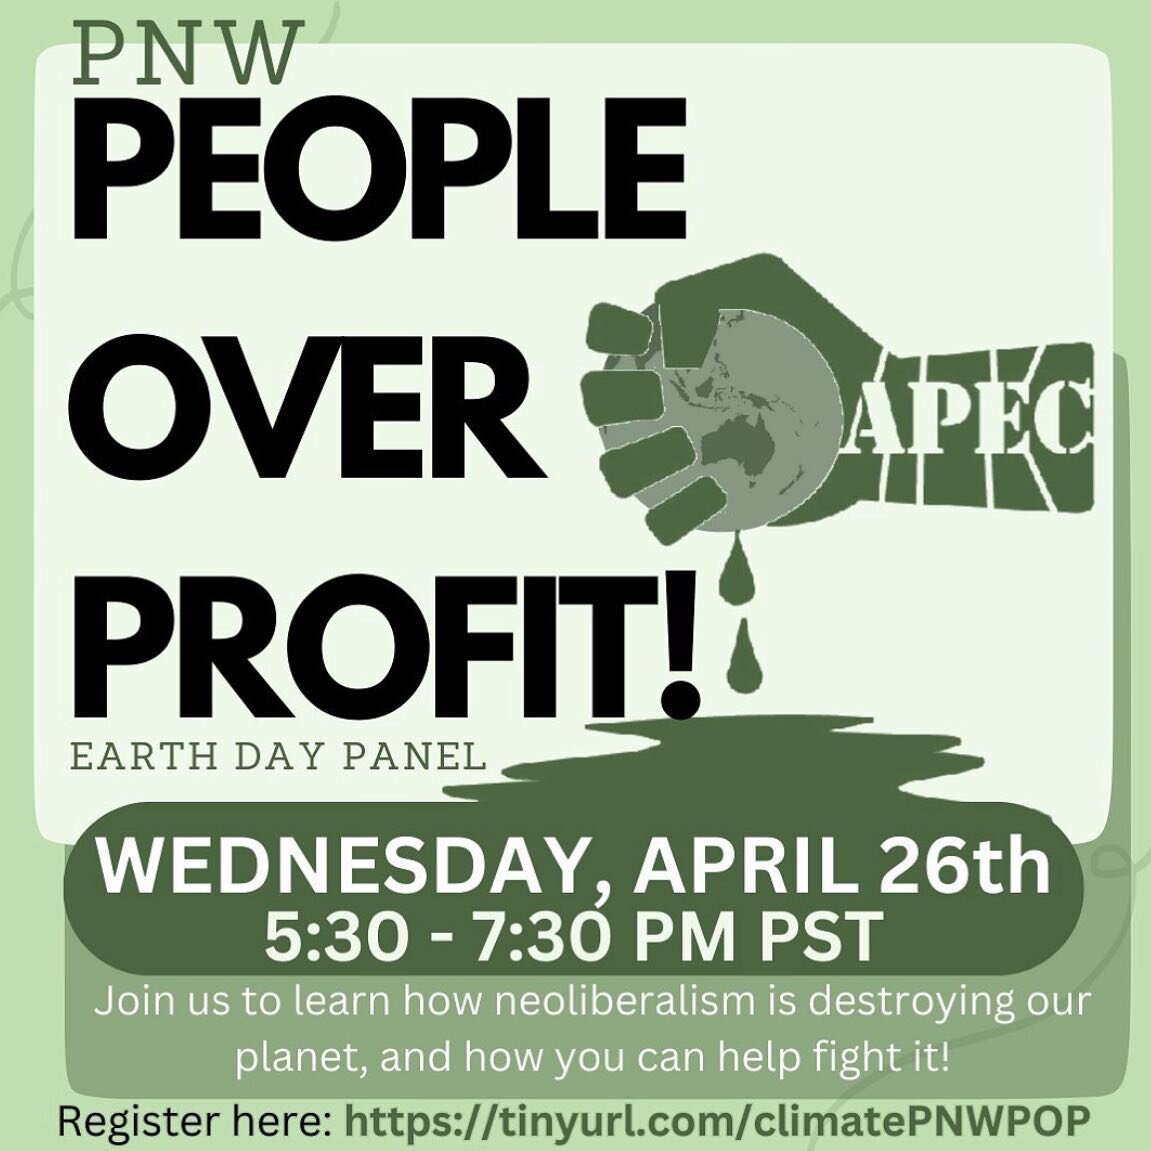 Two of us are on tmrw&rsquo;s Earth Justice panel about the impact of neoliberal policies on climate crisis, farmworkers, and food. Listen in Wednesday 4/26 from 5:30PM-7:30PM!

RSVP for the Anti-APEC Earth Justice panel: tinyurl.com/climatePNWPOP